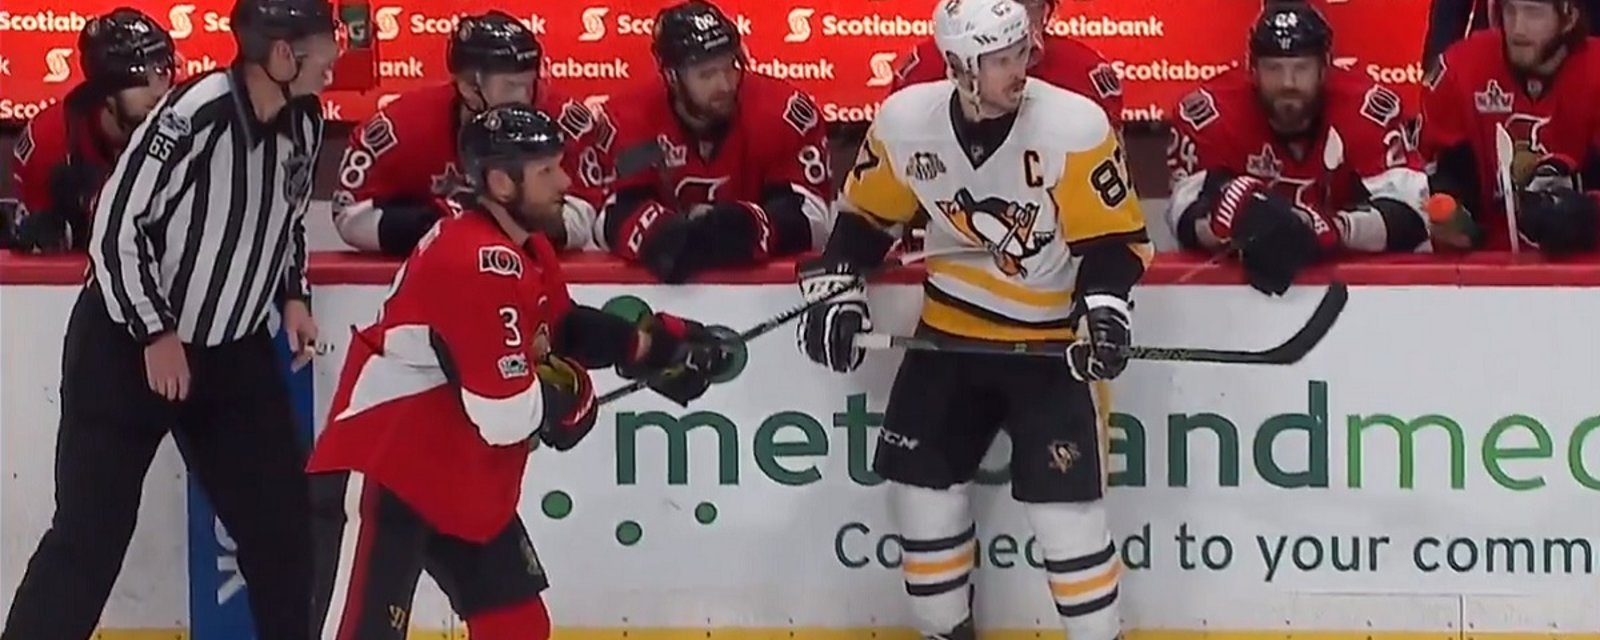 Sidney Crosby gets bullied by the Senators bench in hilarious fashion.